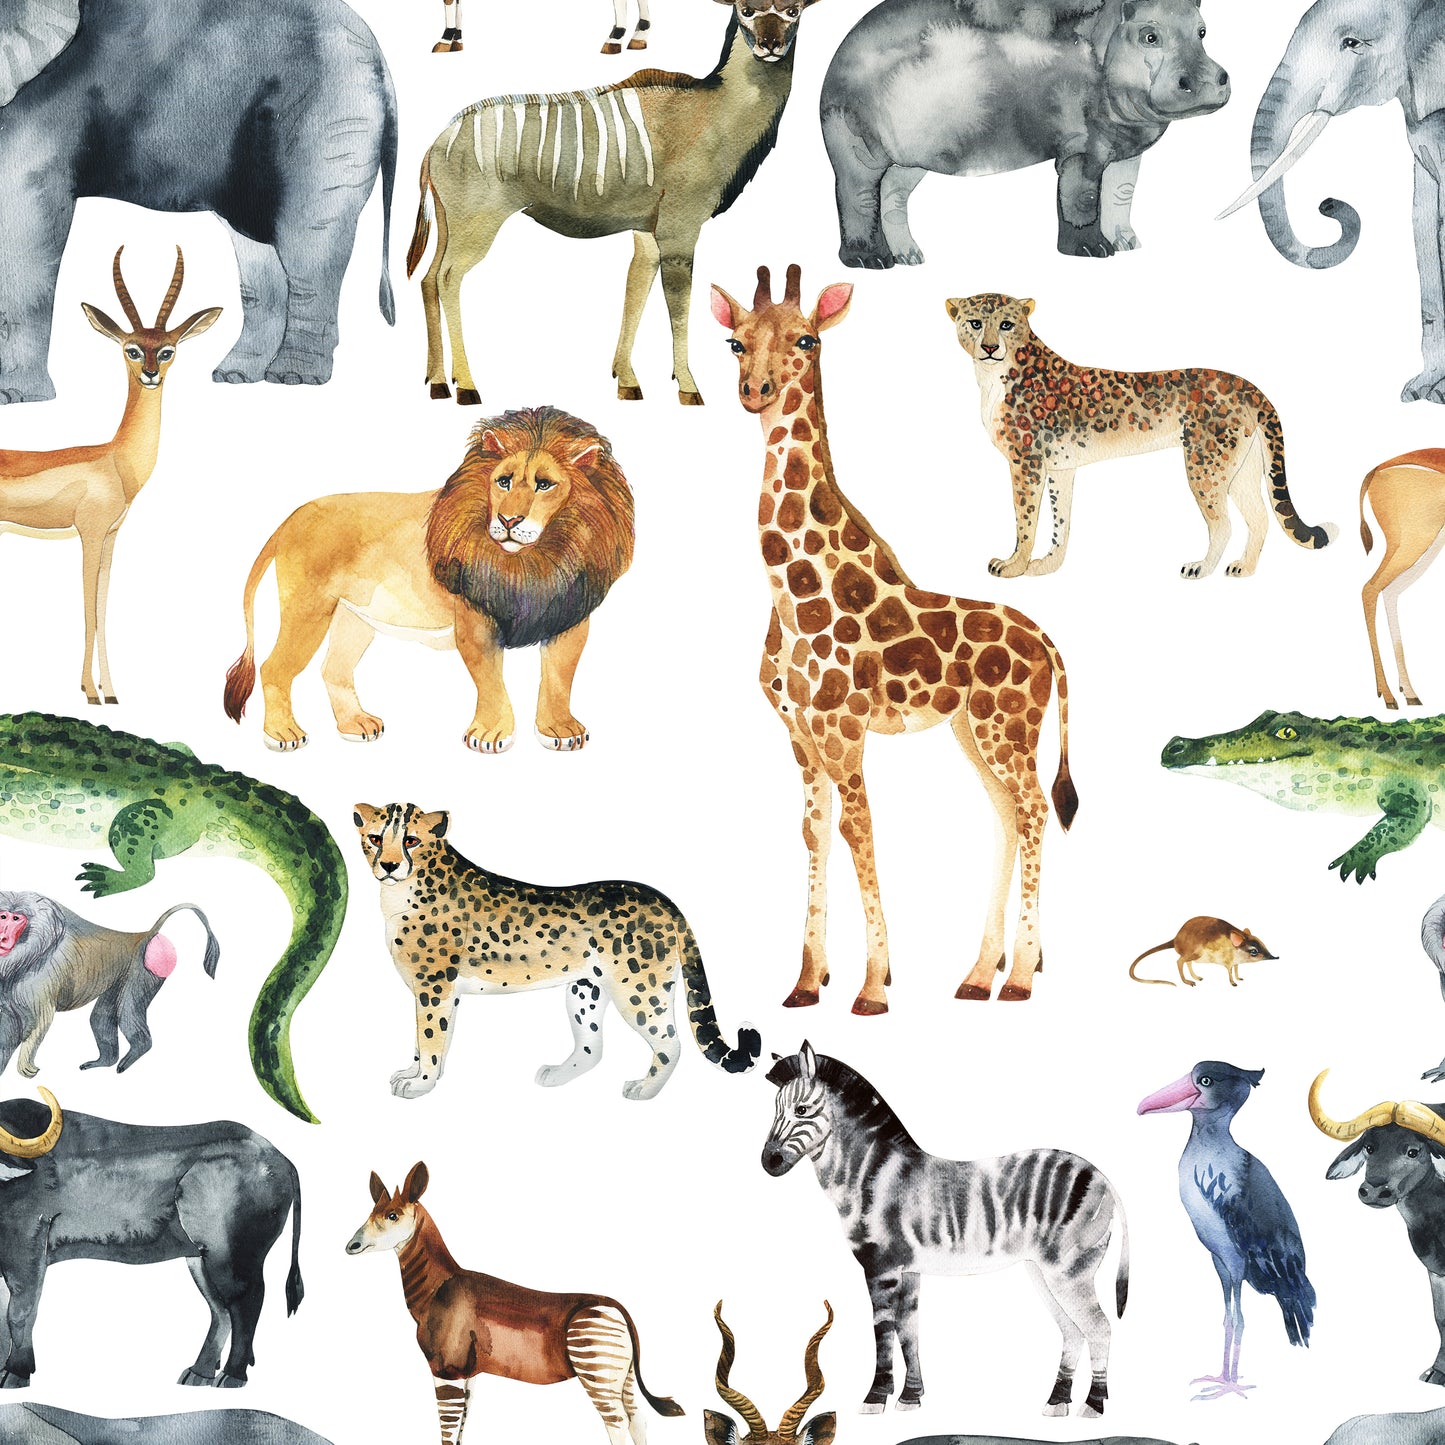 Watercolor Zoo Removable Peel And Stick Wallpaper